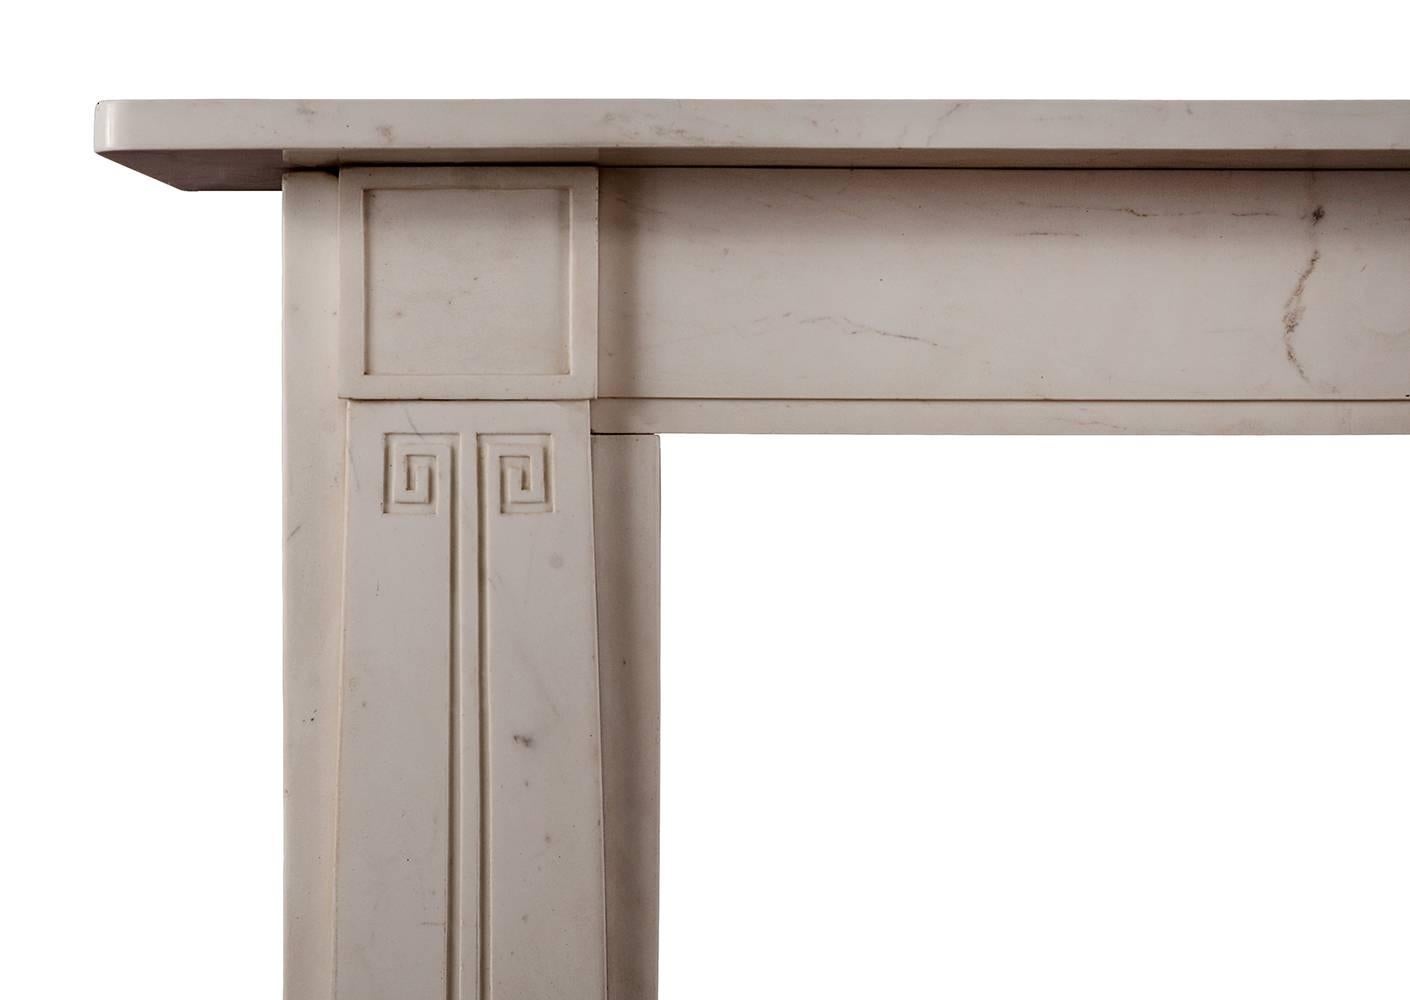 A refined Statuary marble fireplace in the manner of Sir John Soane. The tapering jambs with Greek key decoration, surmounted by square panelled blockings. Plain frieze and shelf, English, early 19th century. Photo taken prior to